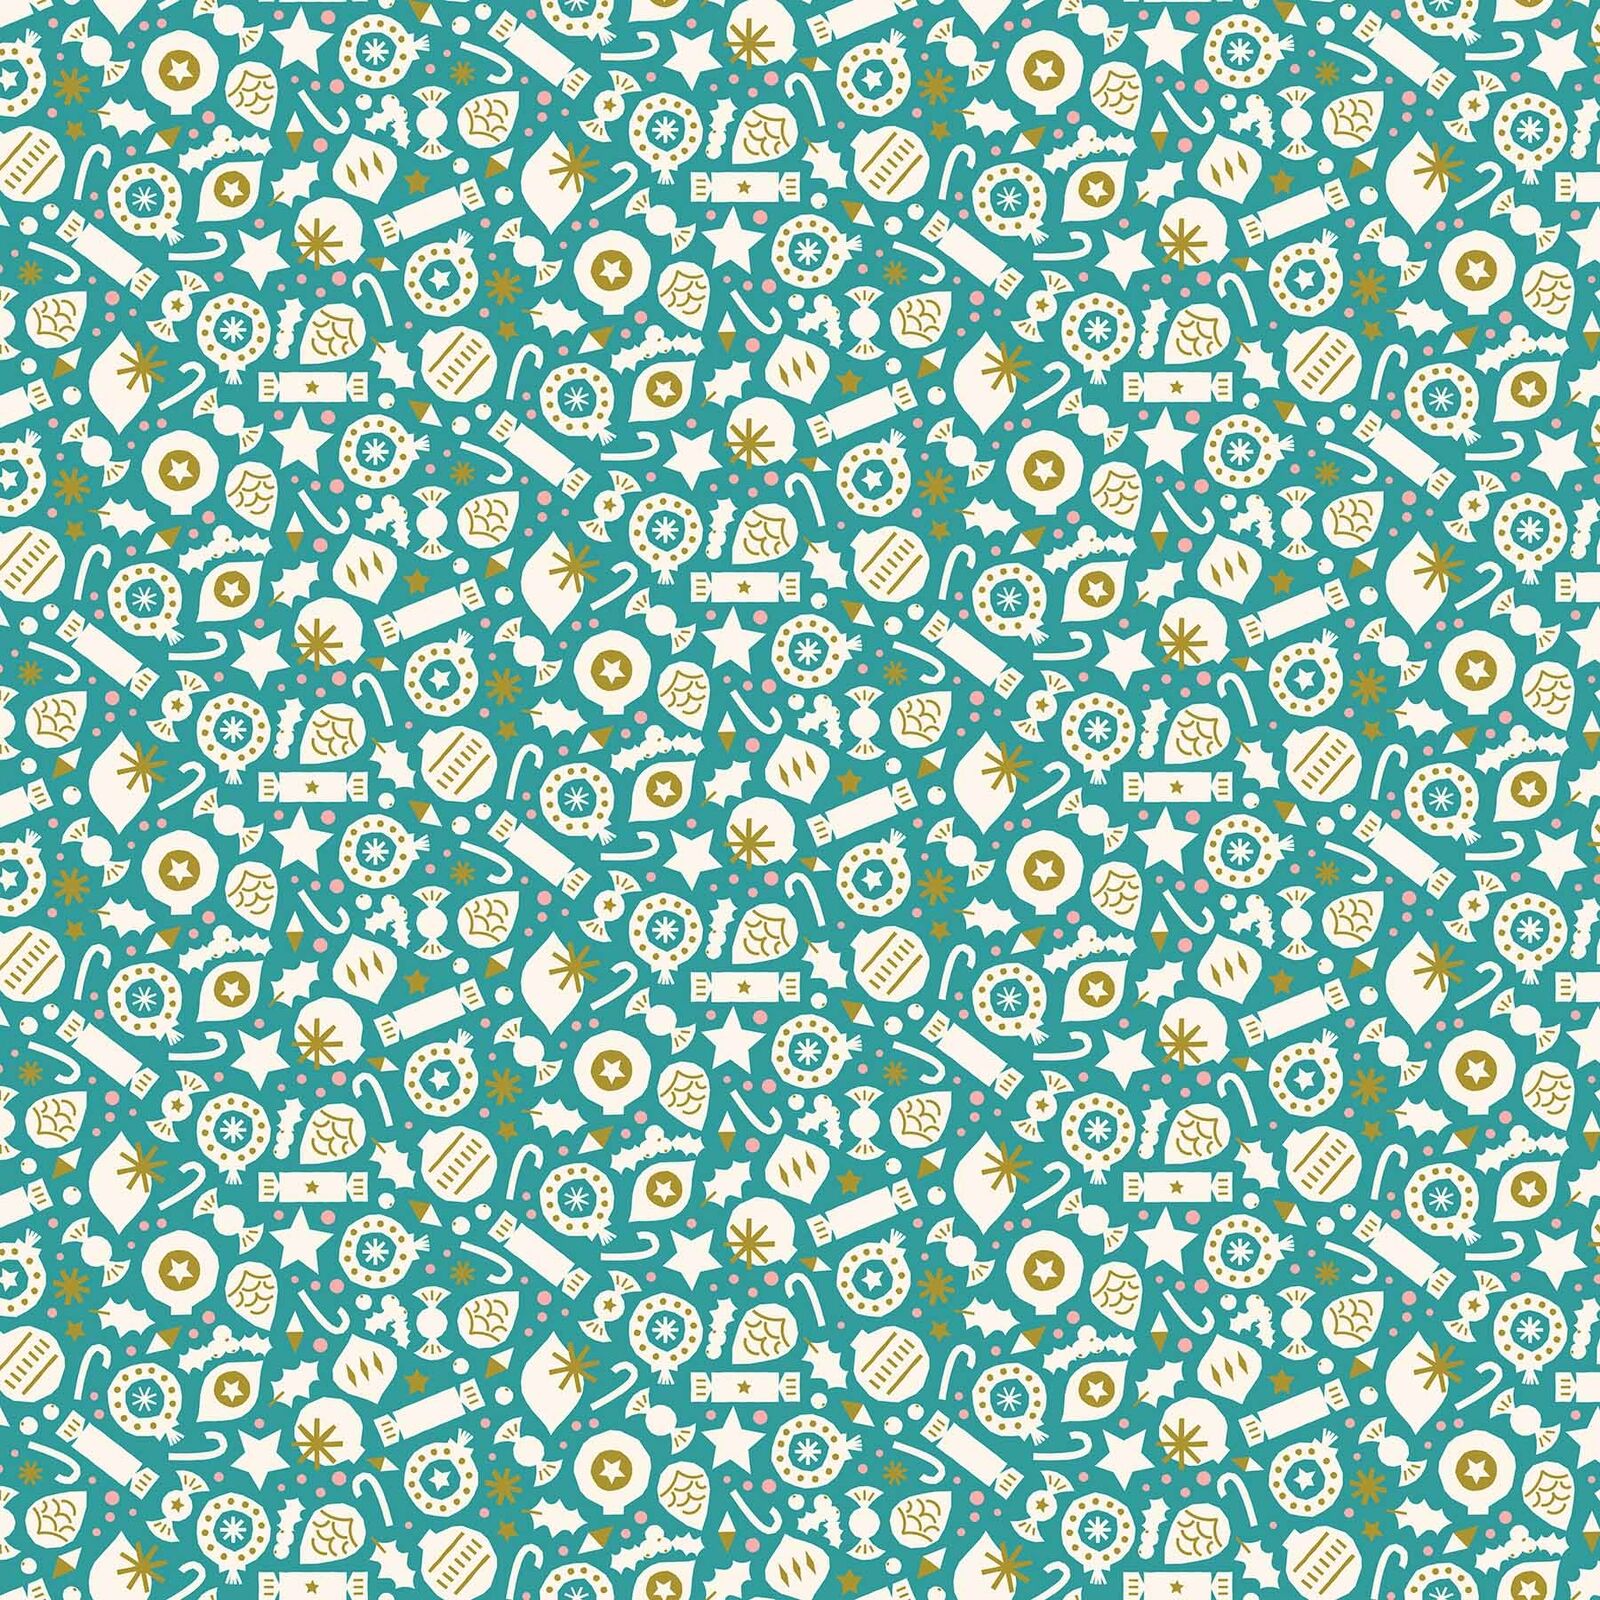 Polar Magic by Figo Fabrics - Party on Turqoise (90176M-62) (sold by the yard)